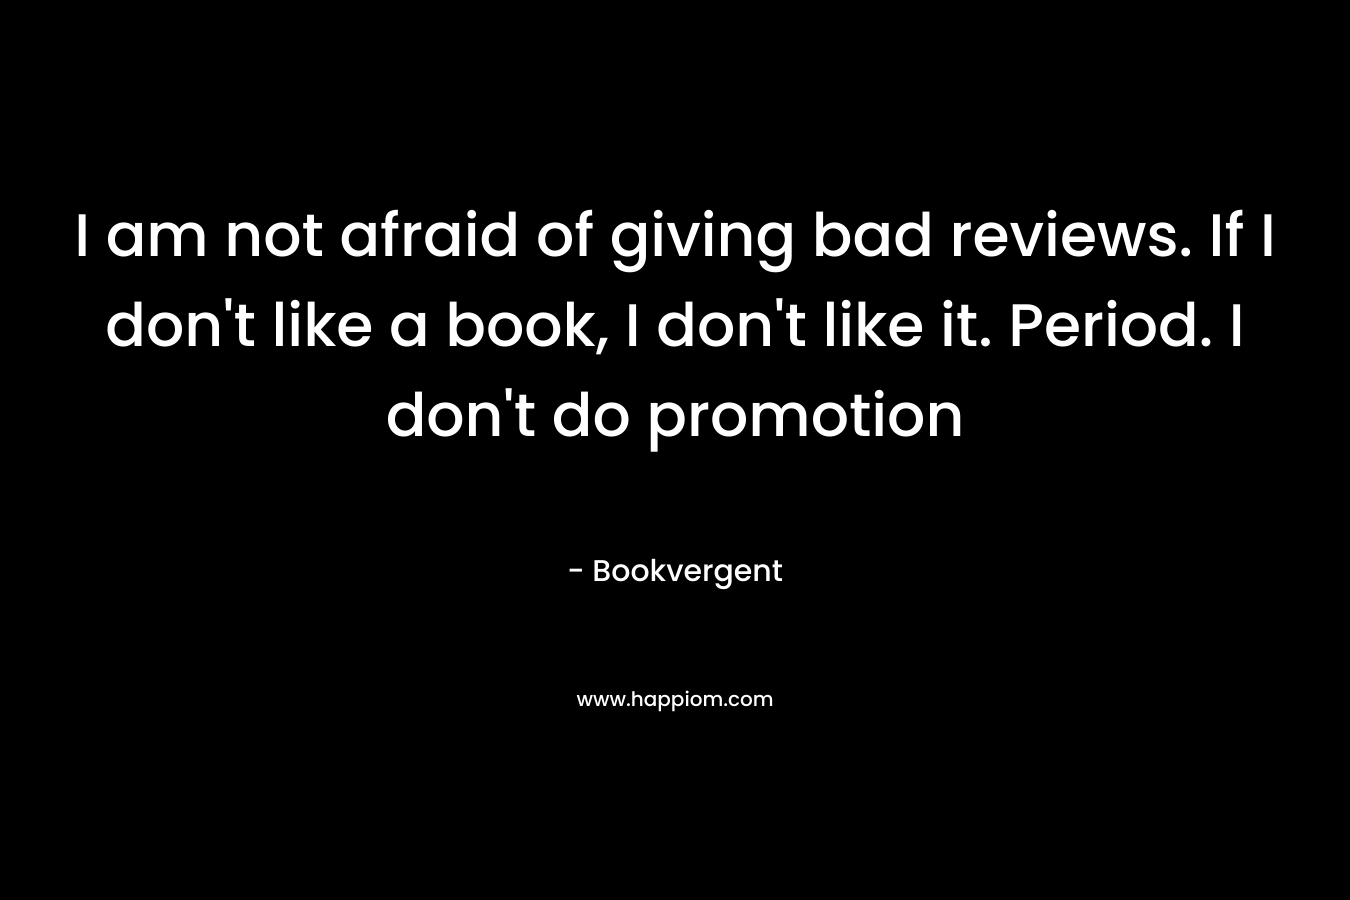 I am not afraid of giving bad reviews. If I don't like a book, I don't like it. Period. I don't do promotion